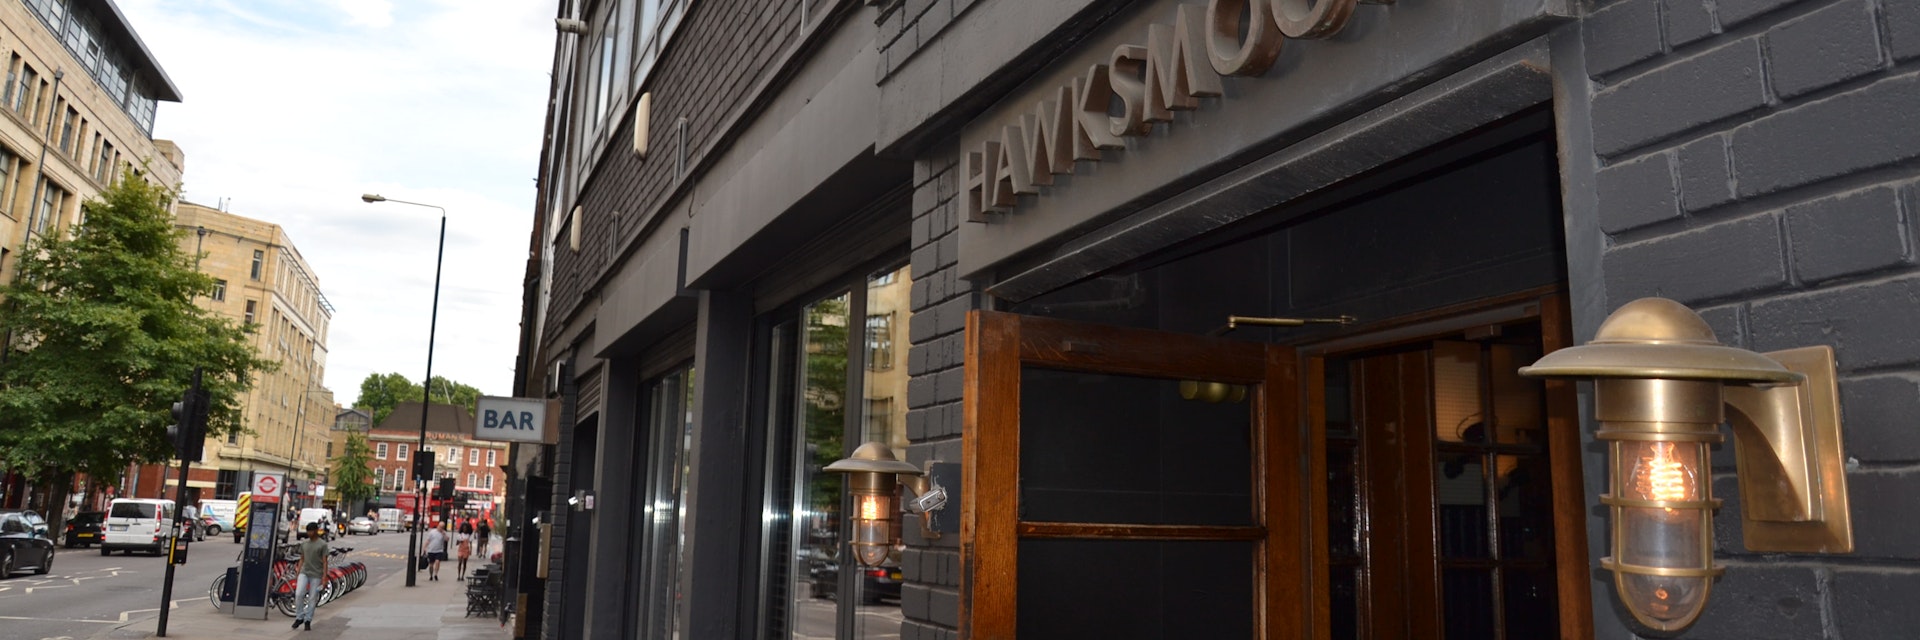 The discreet entrance to Hawksmoor, famed for its high quality steaks